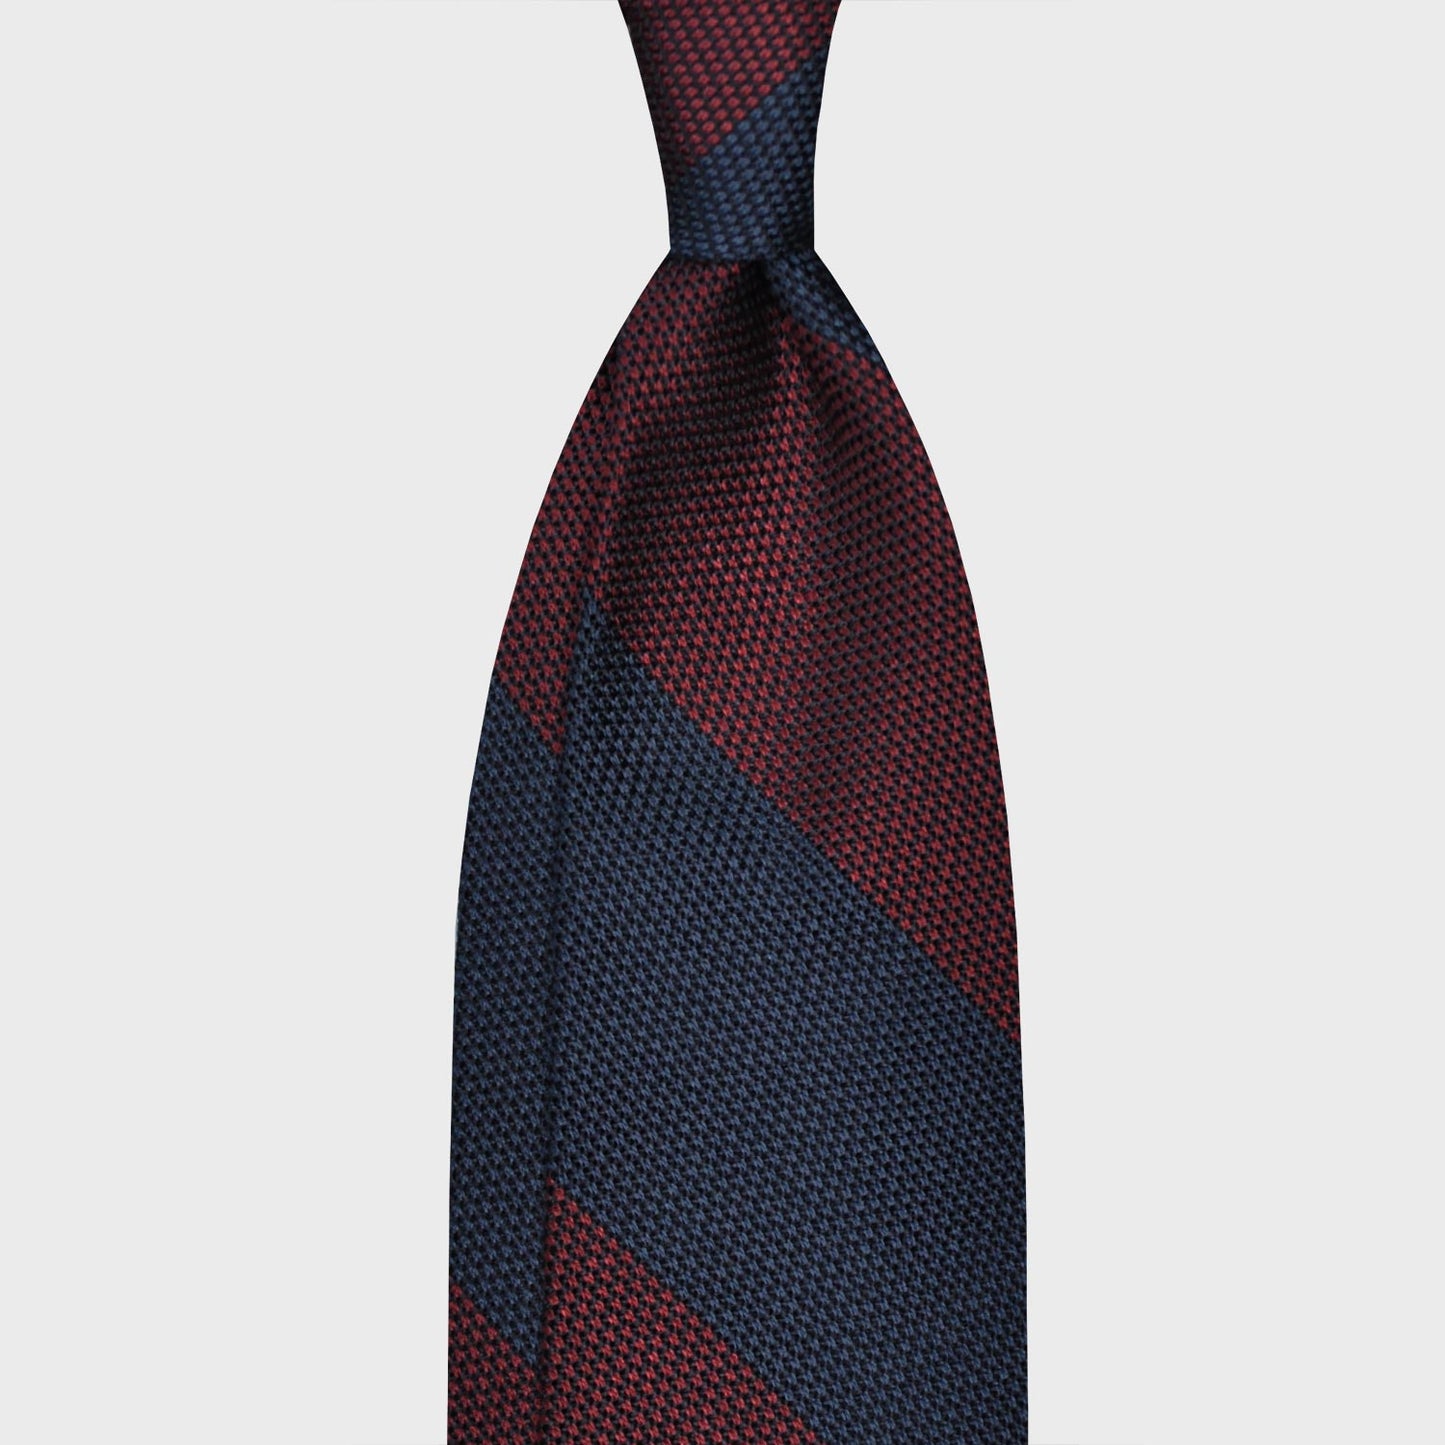 Burgundy Red Regimental Grenadine Silk Tie Wide Striped. Wide striped silk tie made with refined grenadine silk, hand made tie F.Marino Napoli exclusive for Wools Boutique Uomo, hand rolled edge, 3 folds unlined, striped burgundy red and navy blue